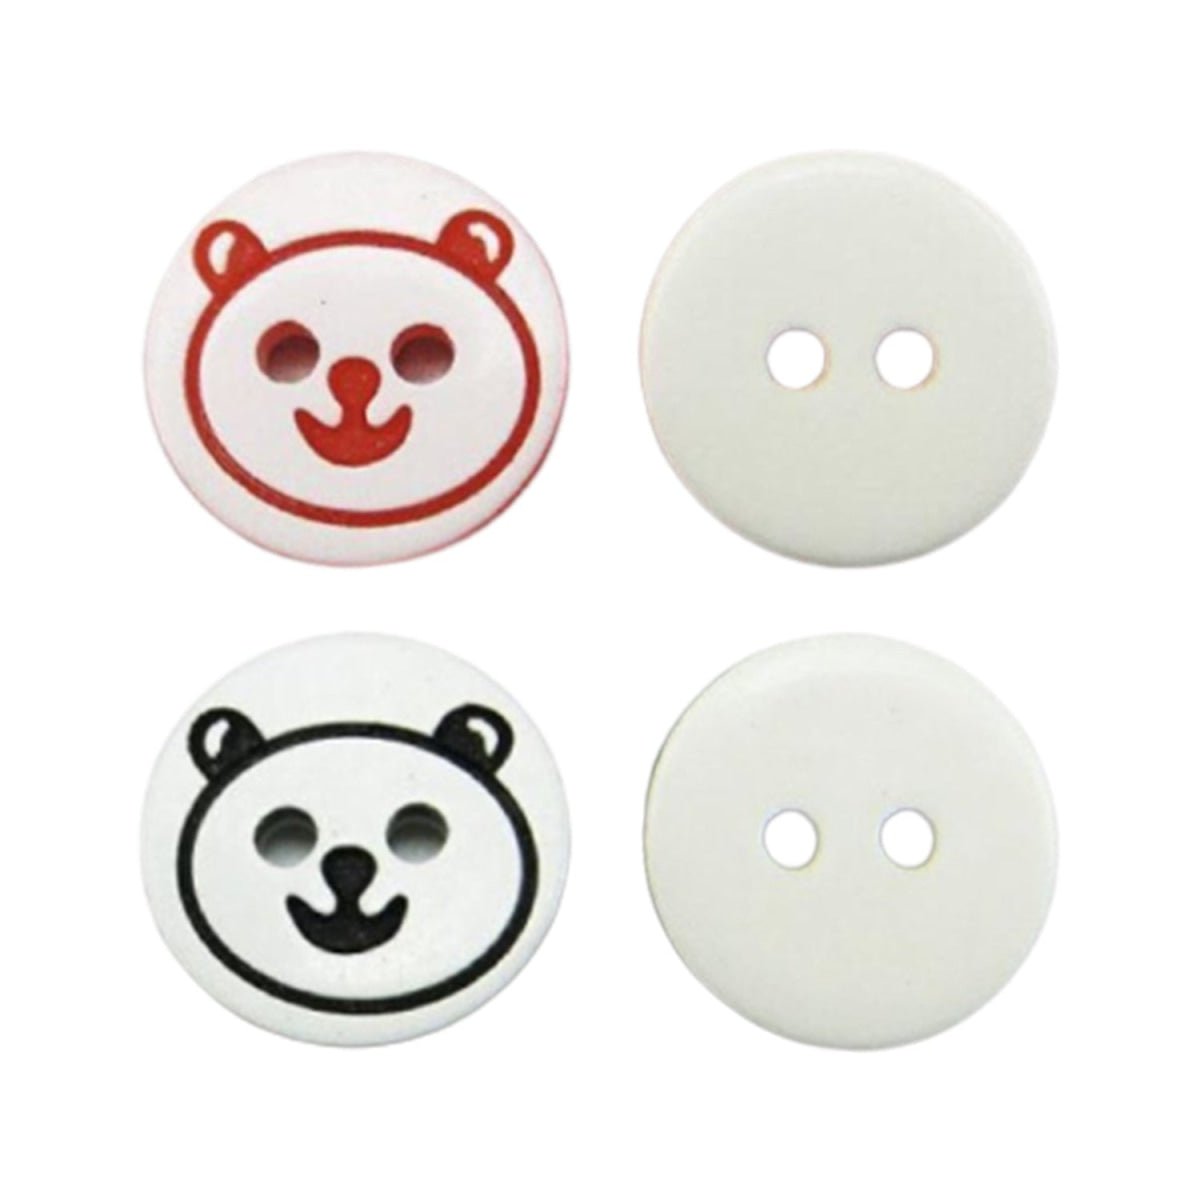 20pcs 12.5mm Black Bear Pattern Buttons Sewing Resin Button For Kids Clothes Decorative Handicrafts DIY - Black - - Asia Sell